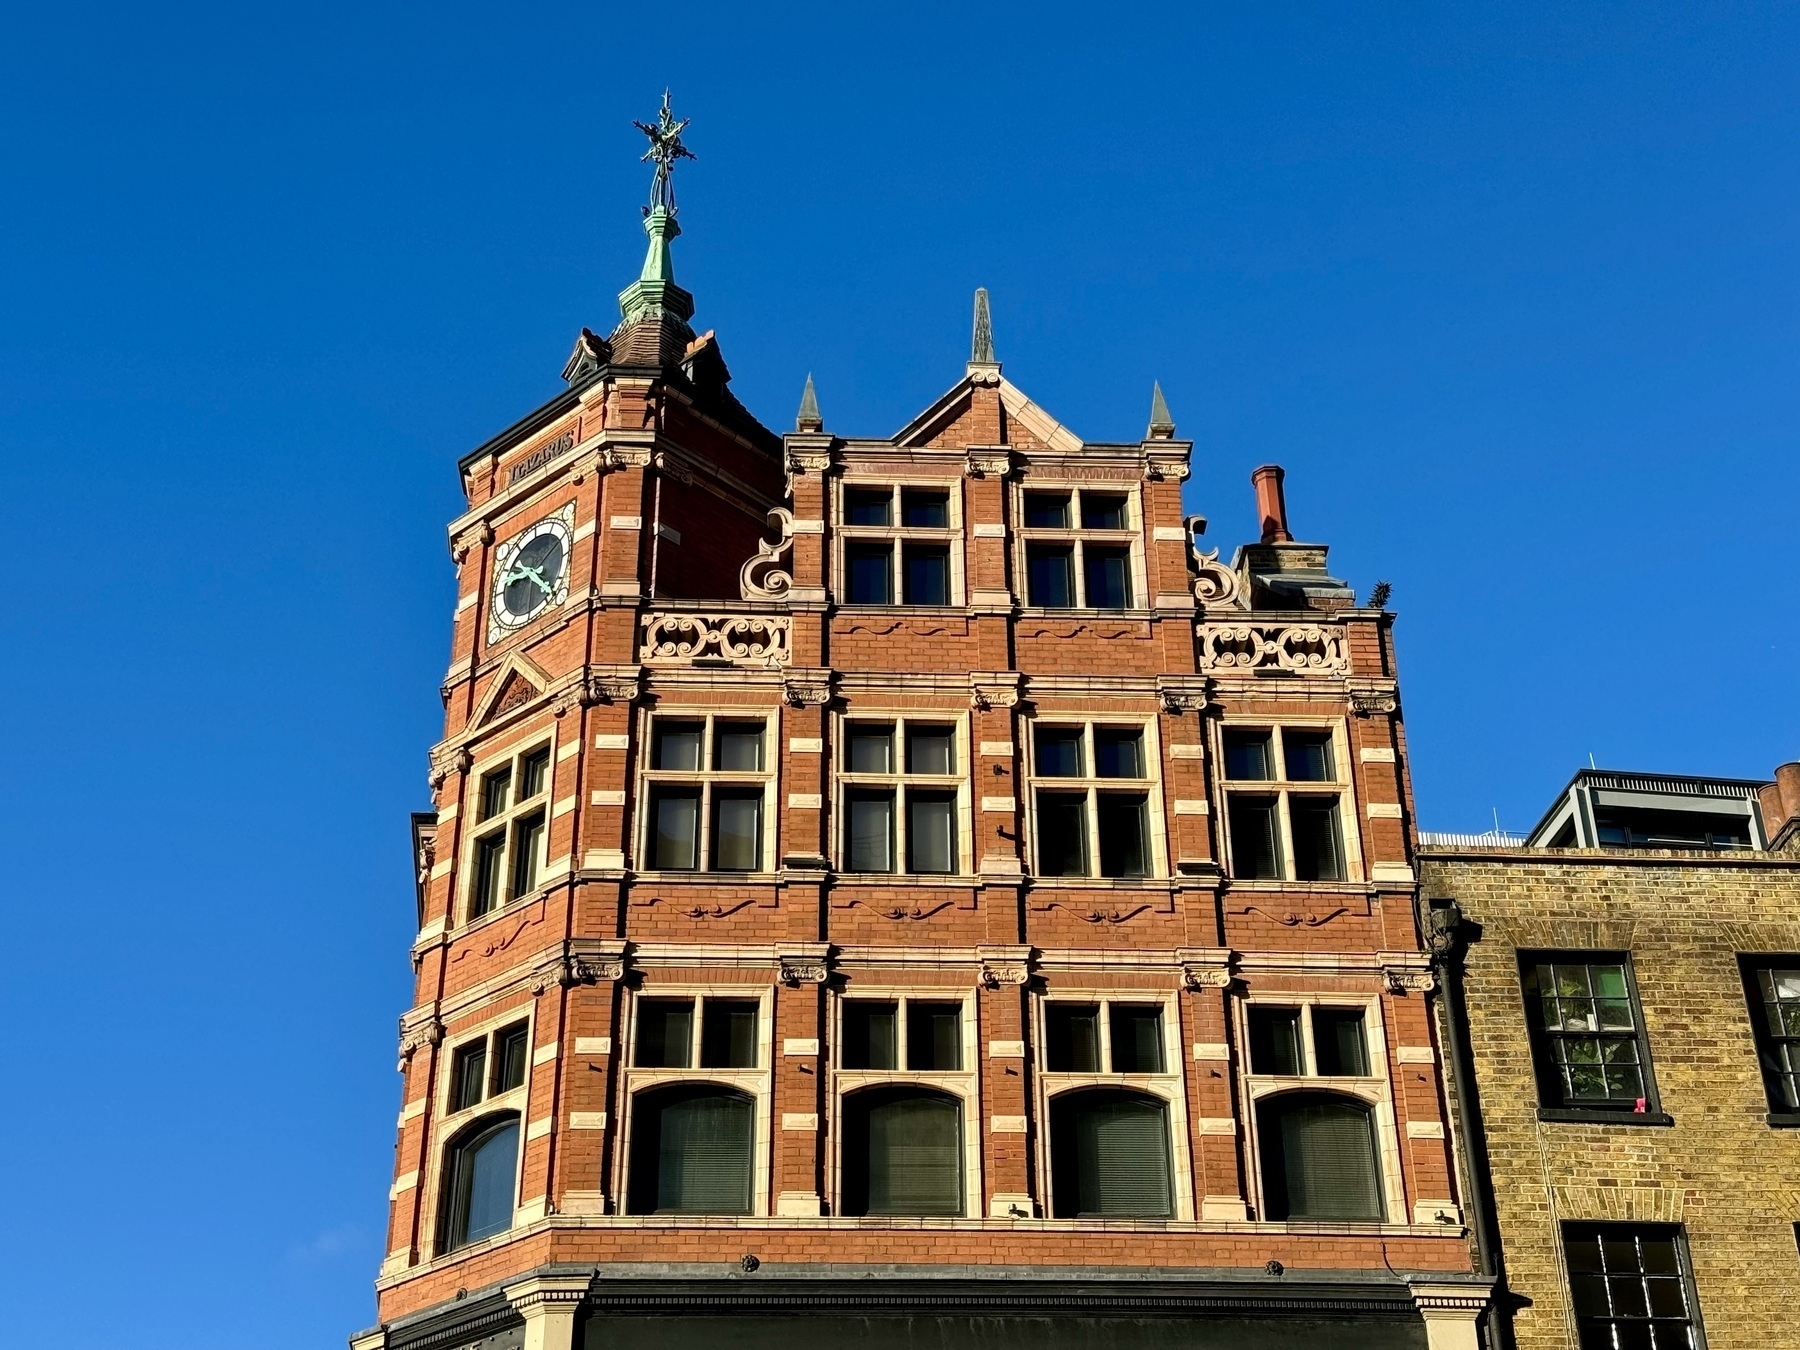 Red brick and sandstone building against a bright blue sky.